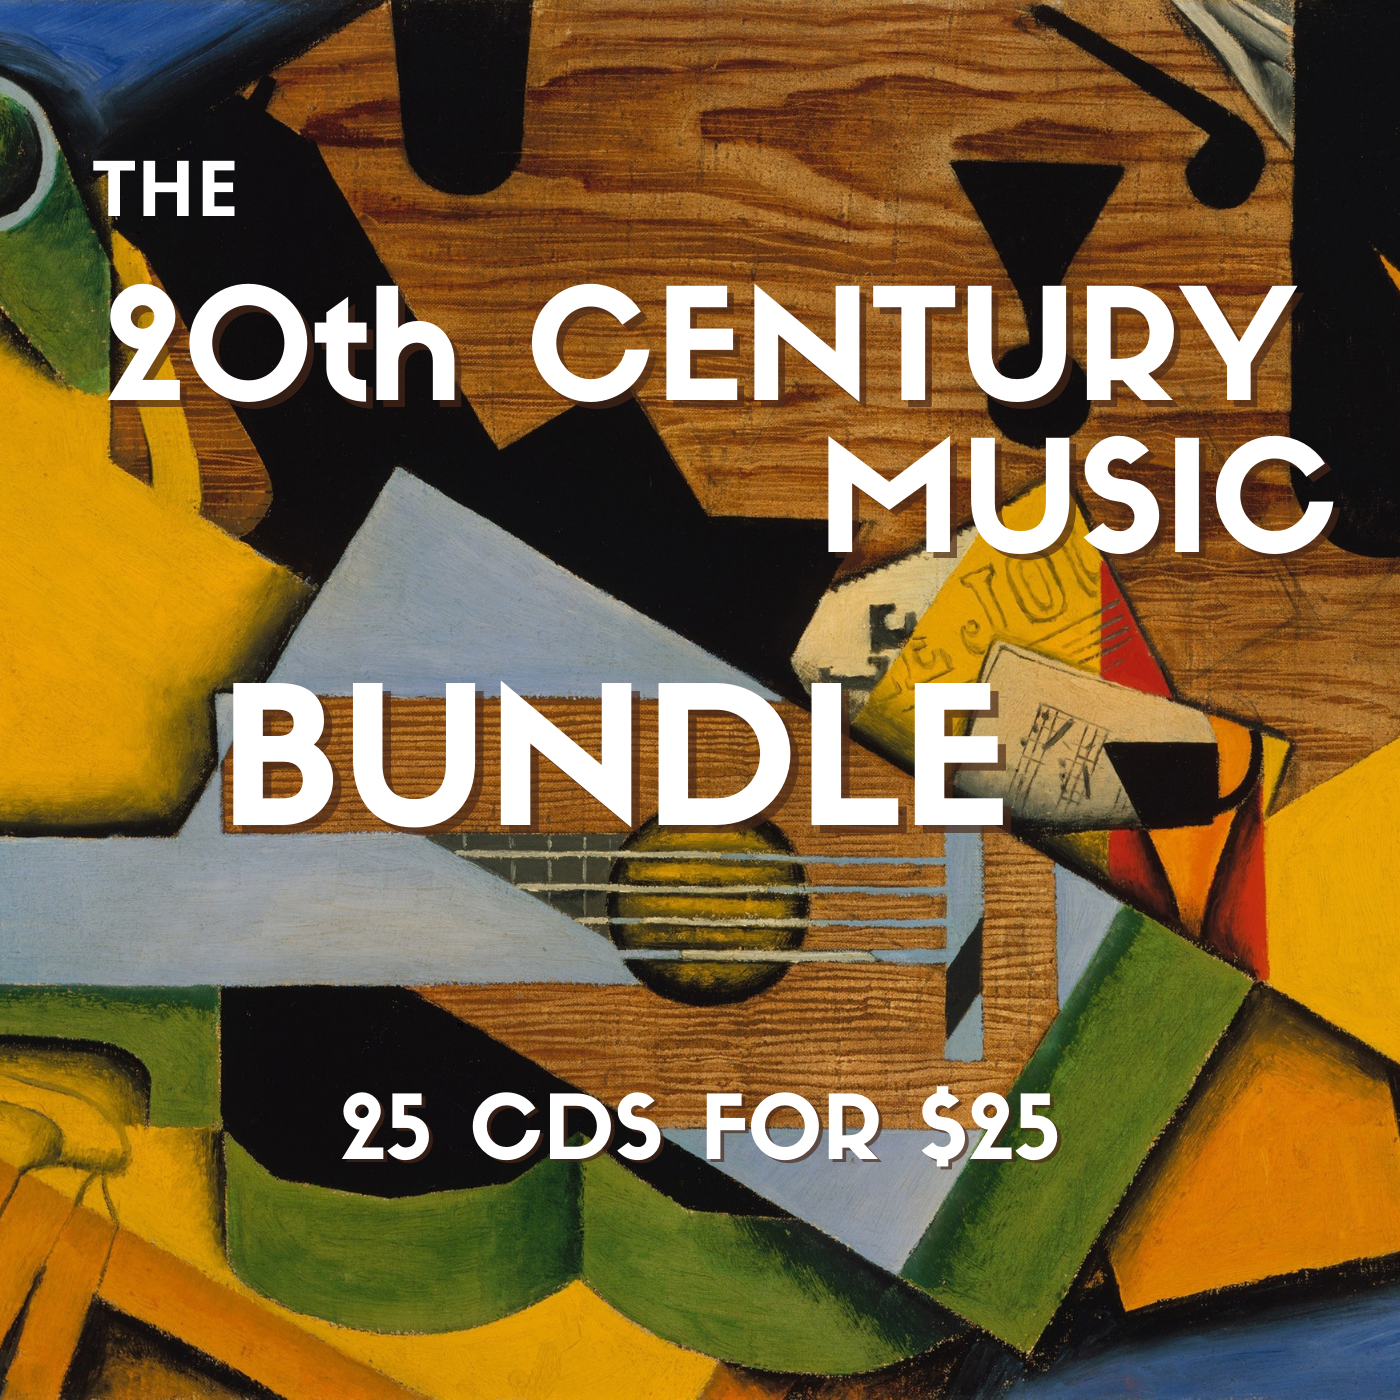 THE 20TH CENTURY MUSIC BUNDLE - 25 CDS FOR $25